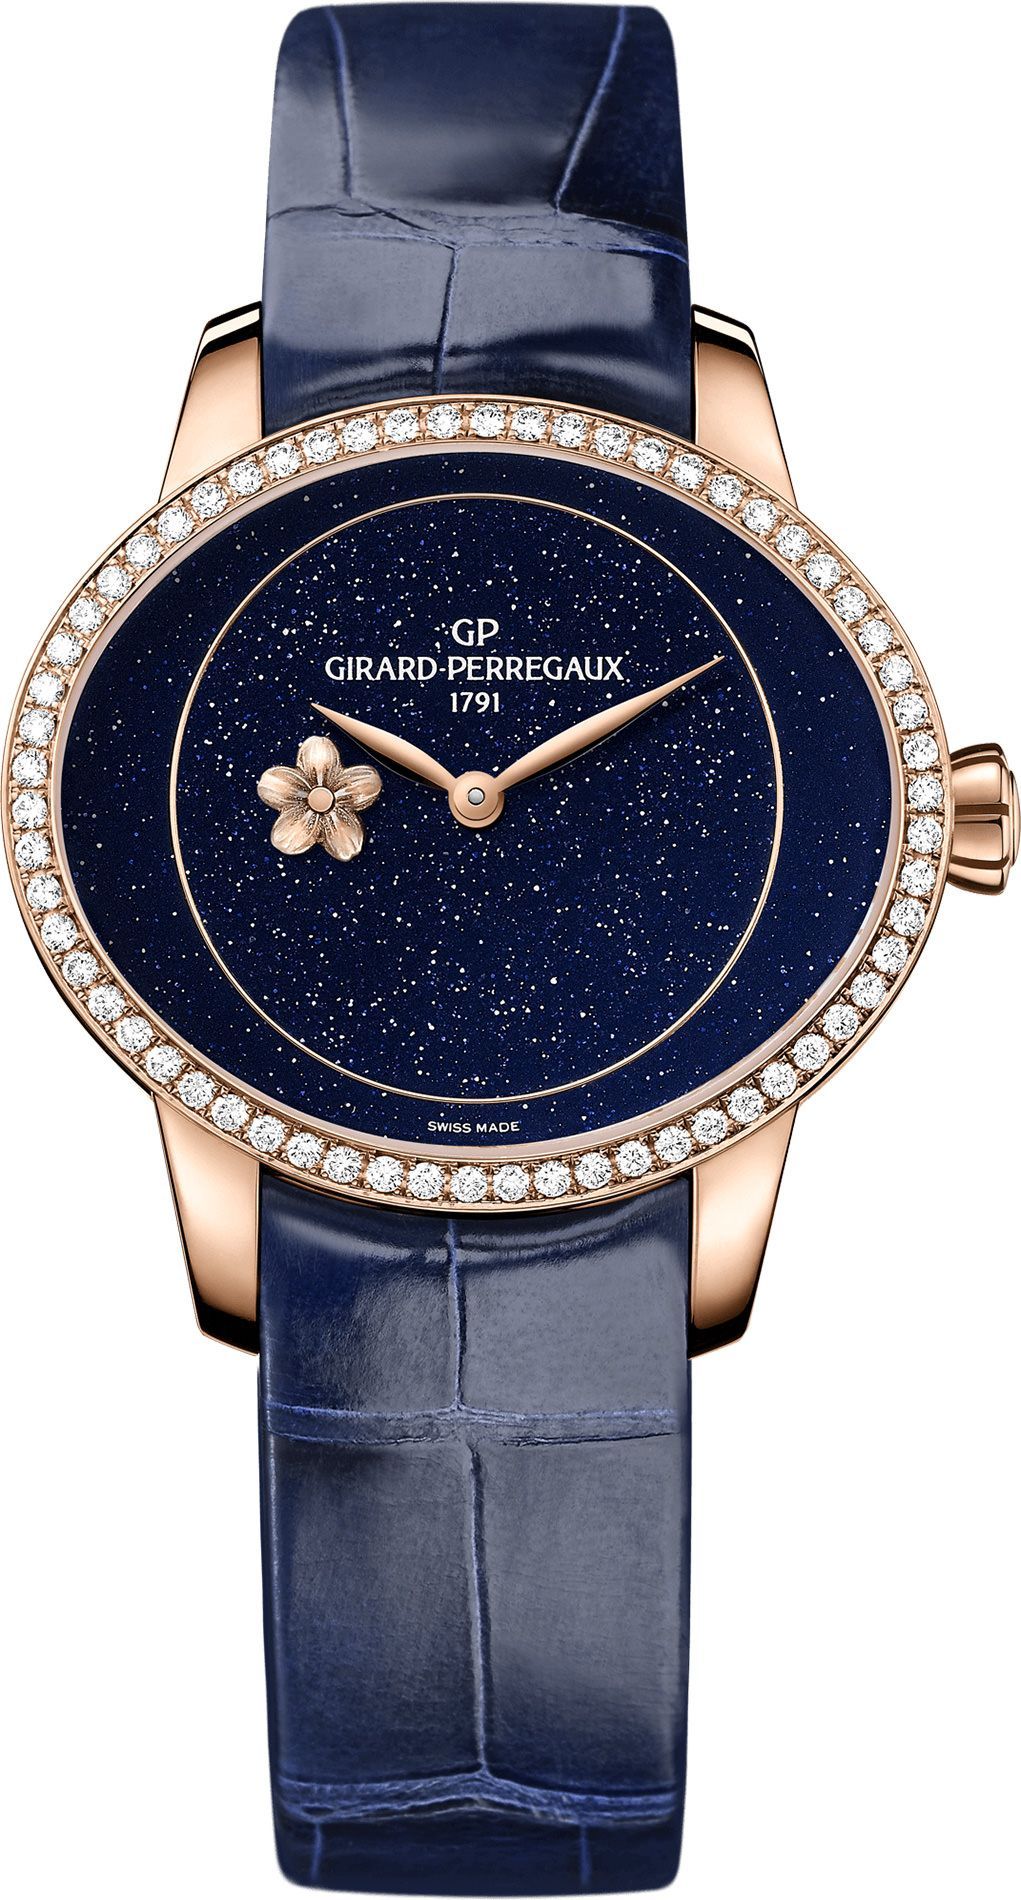 Girard-Perregaux Small Seconds 30.40 mm Watch in Blue Dial For Women - 1